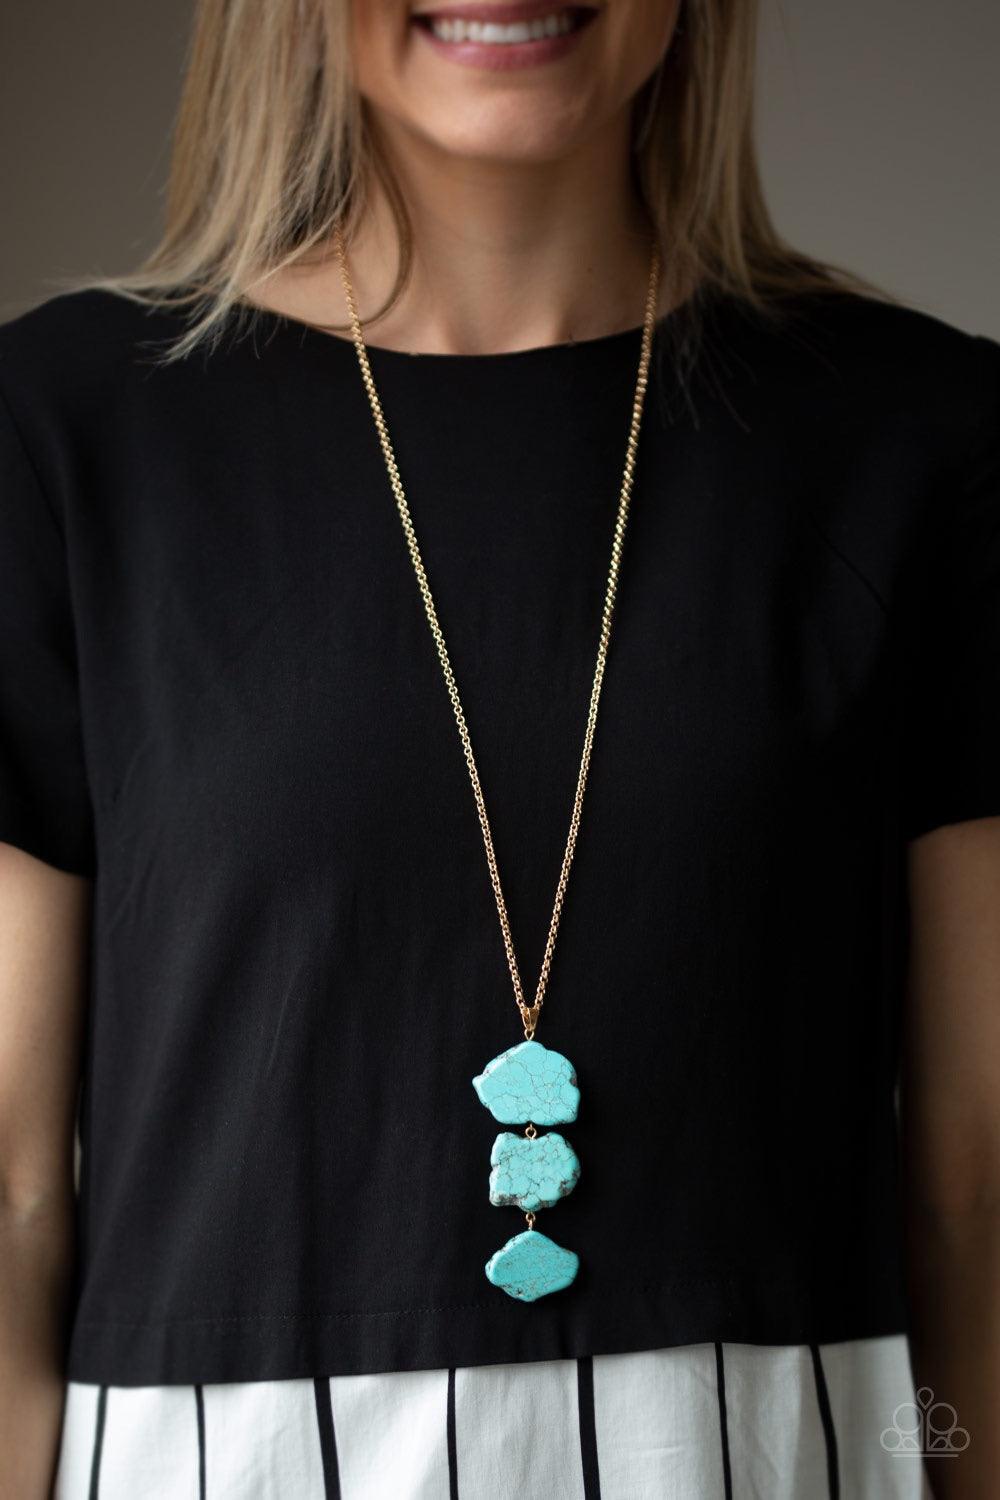 Paparazzi Accessories On The ROAM Again - Gold As if chipped off a cliff, pieces of turquoise rock link at the bottom of a lengthened gold chain for an earthy look. As the stone elements in this piece are natural, some color variation is normal. Features